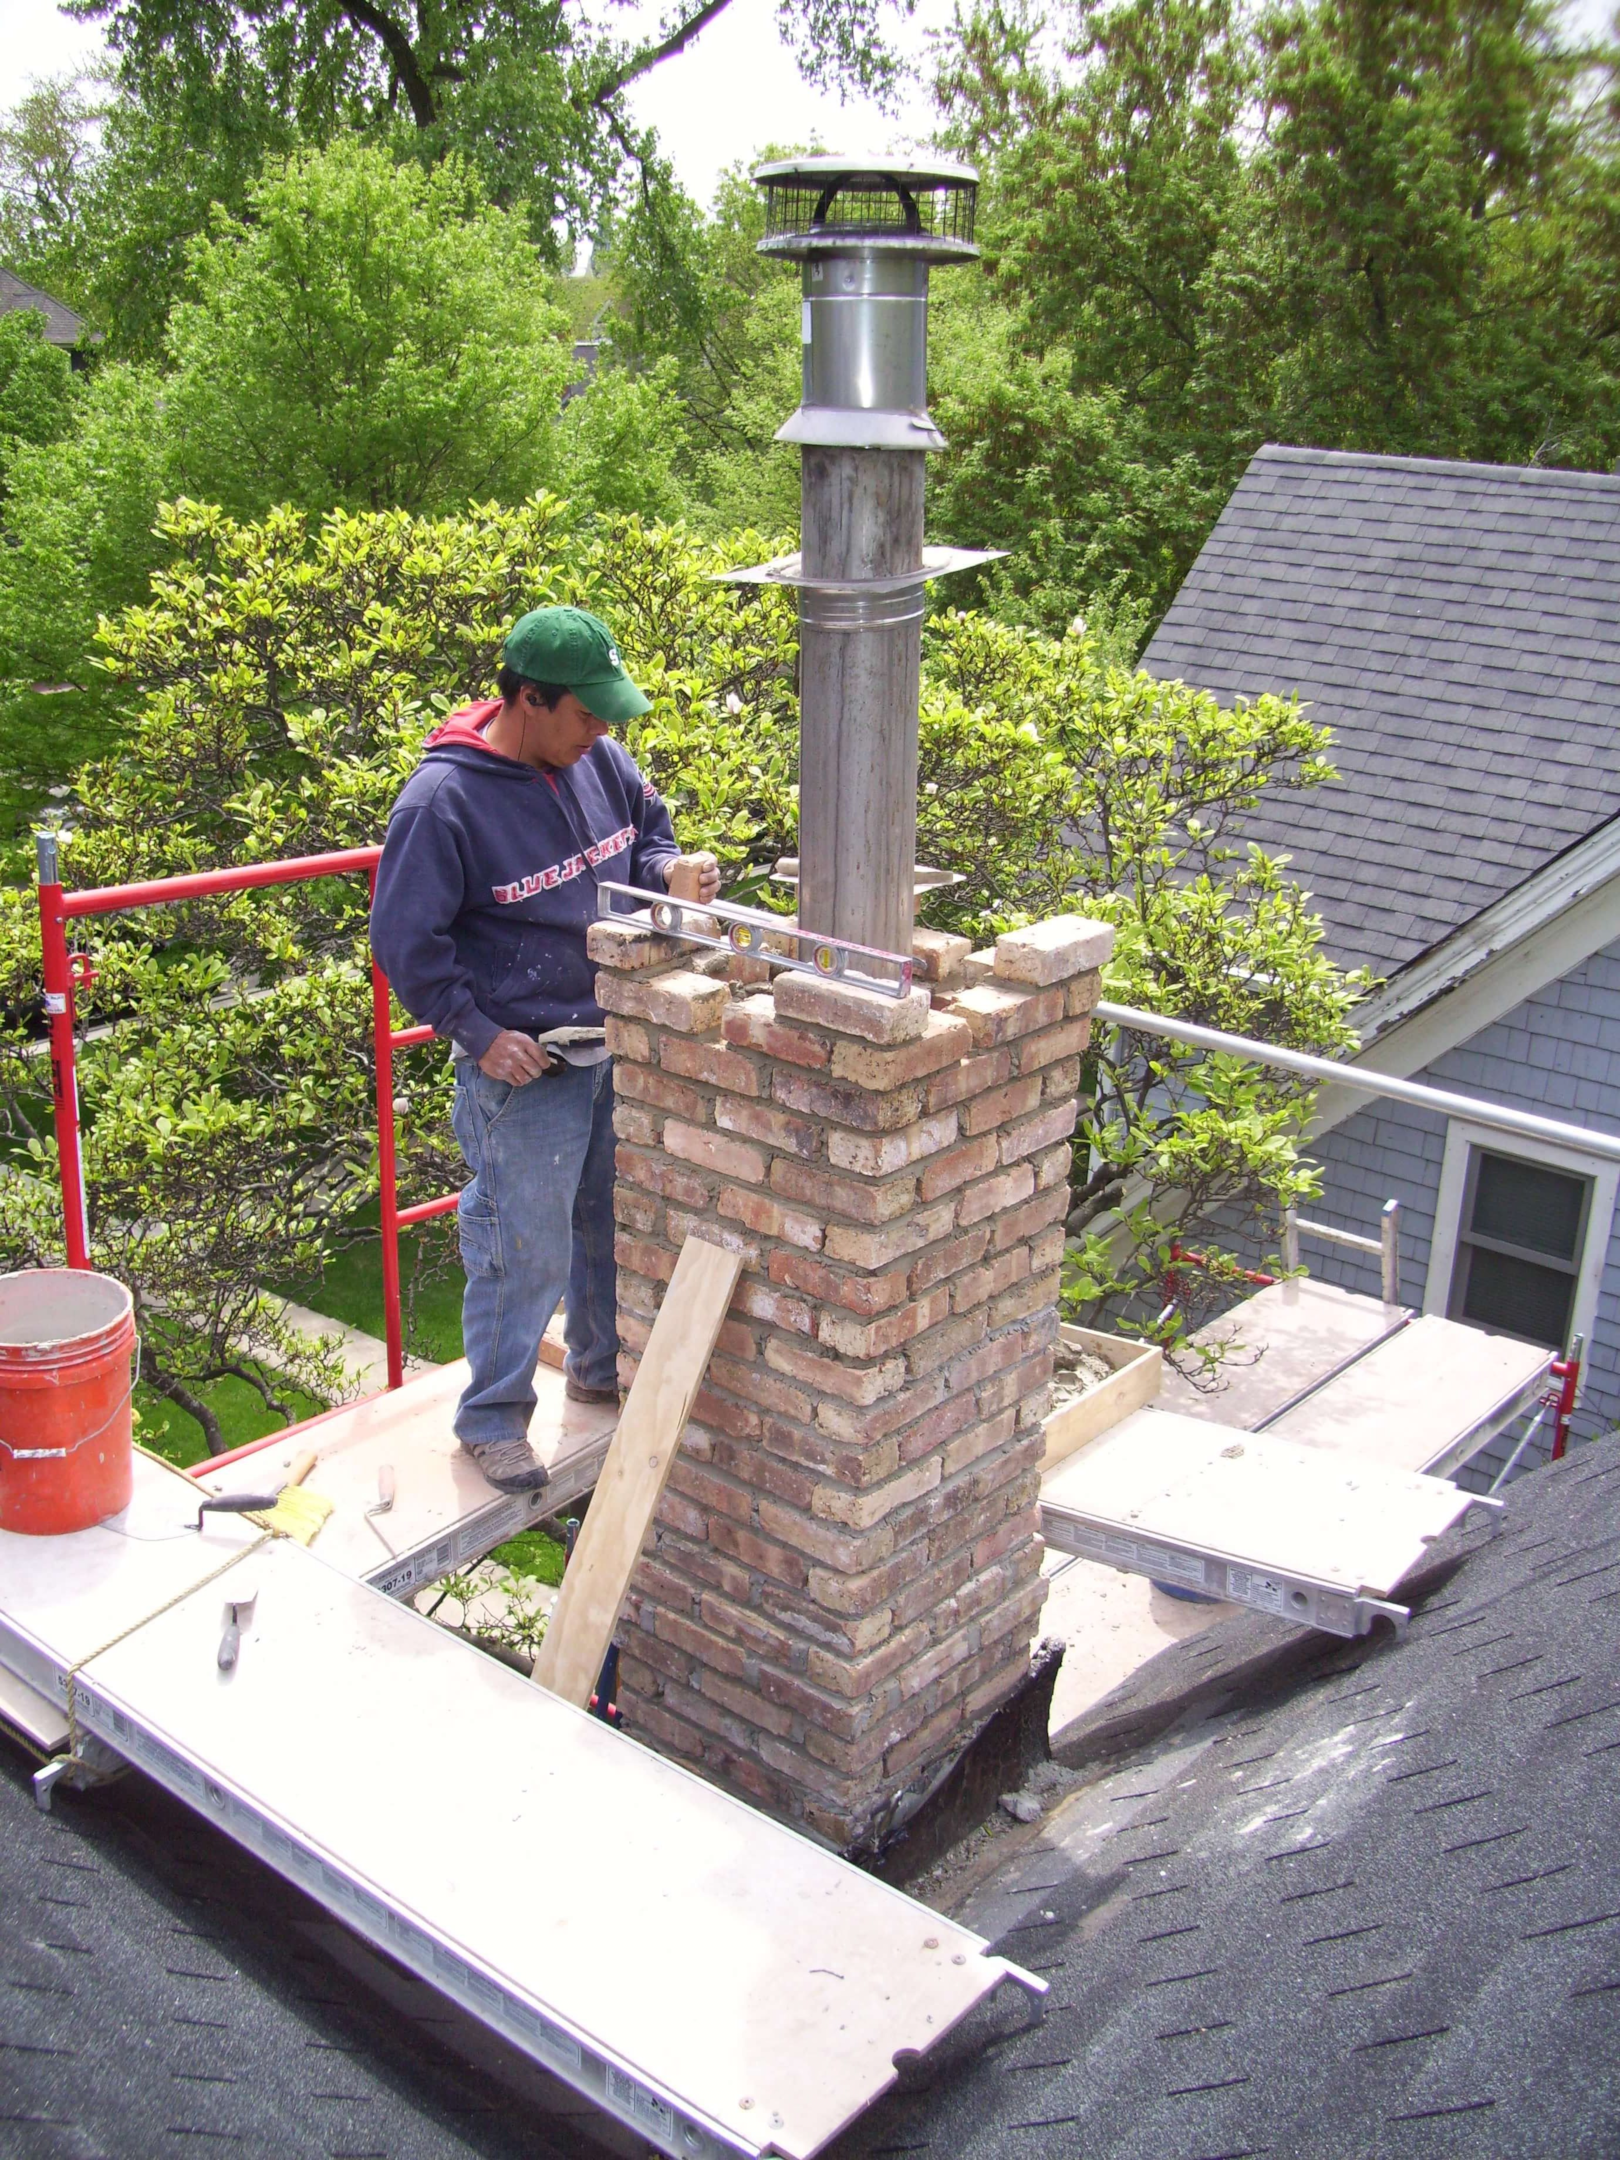 A person maintaining a chimney